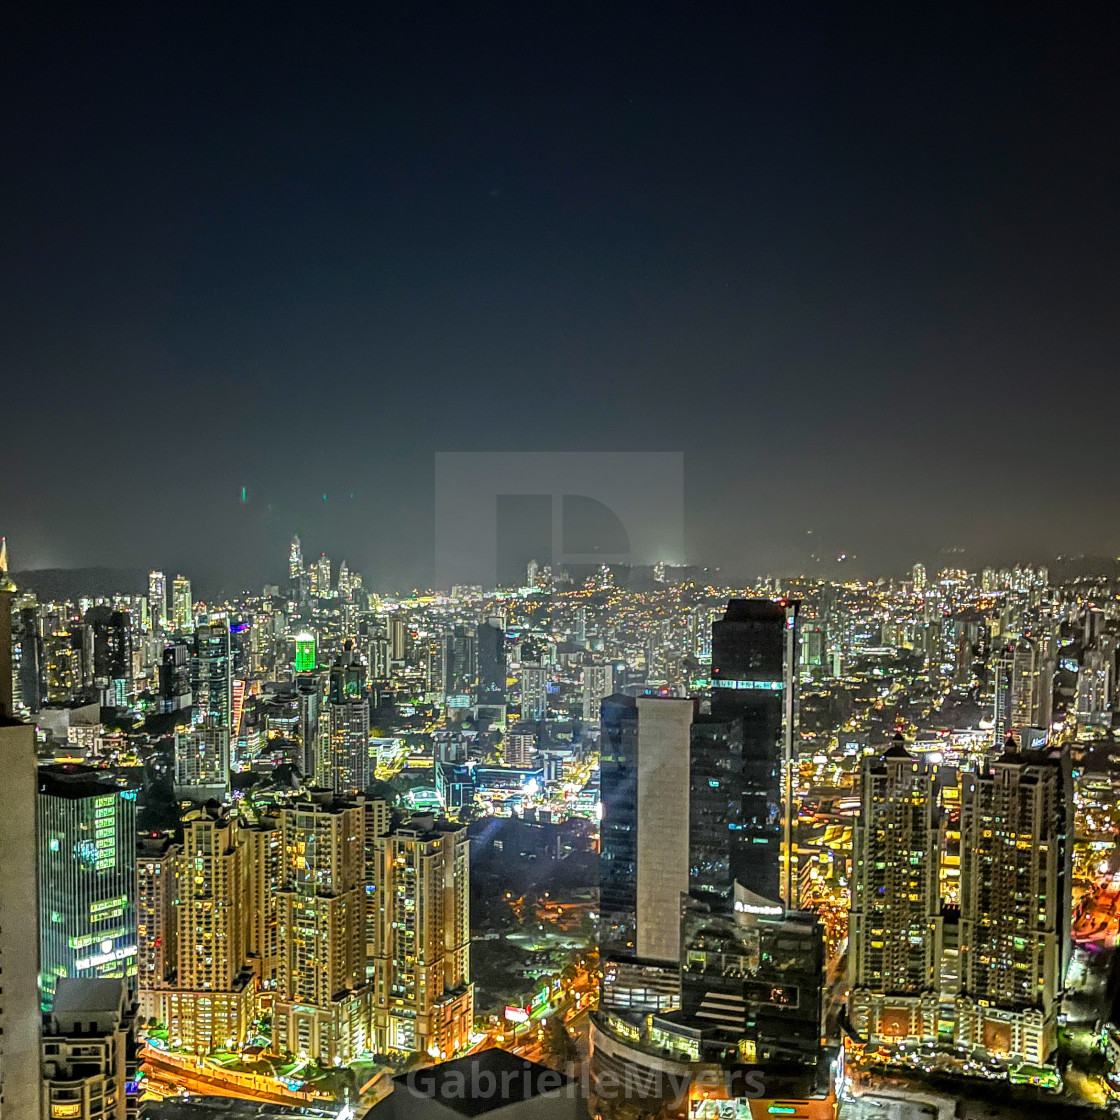 "Each Light, A Point of the Network, Panama City" stock image